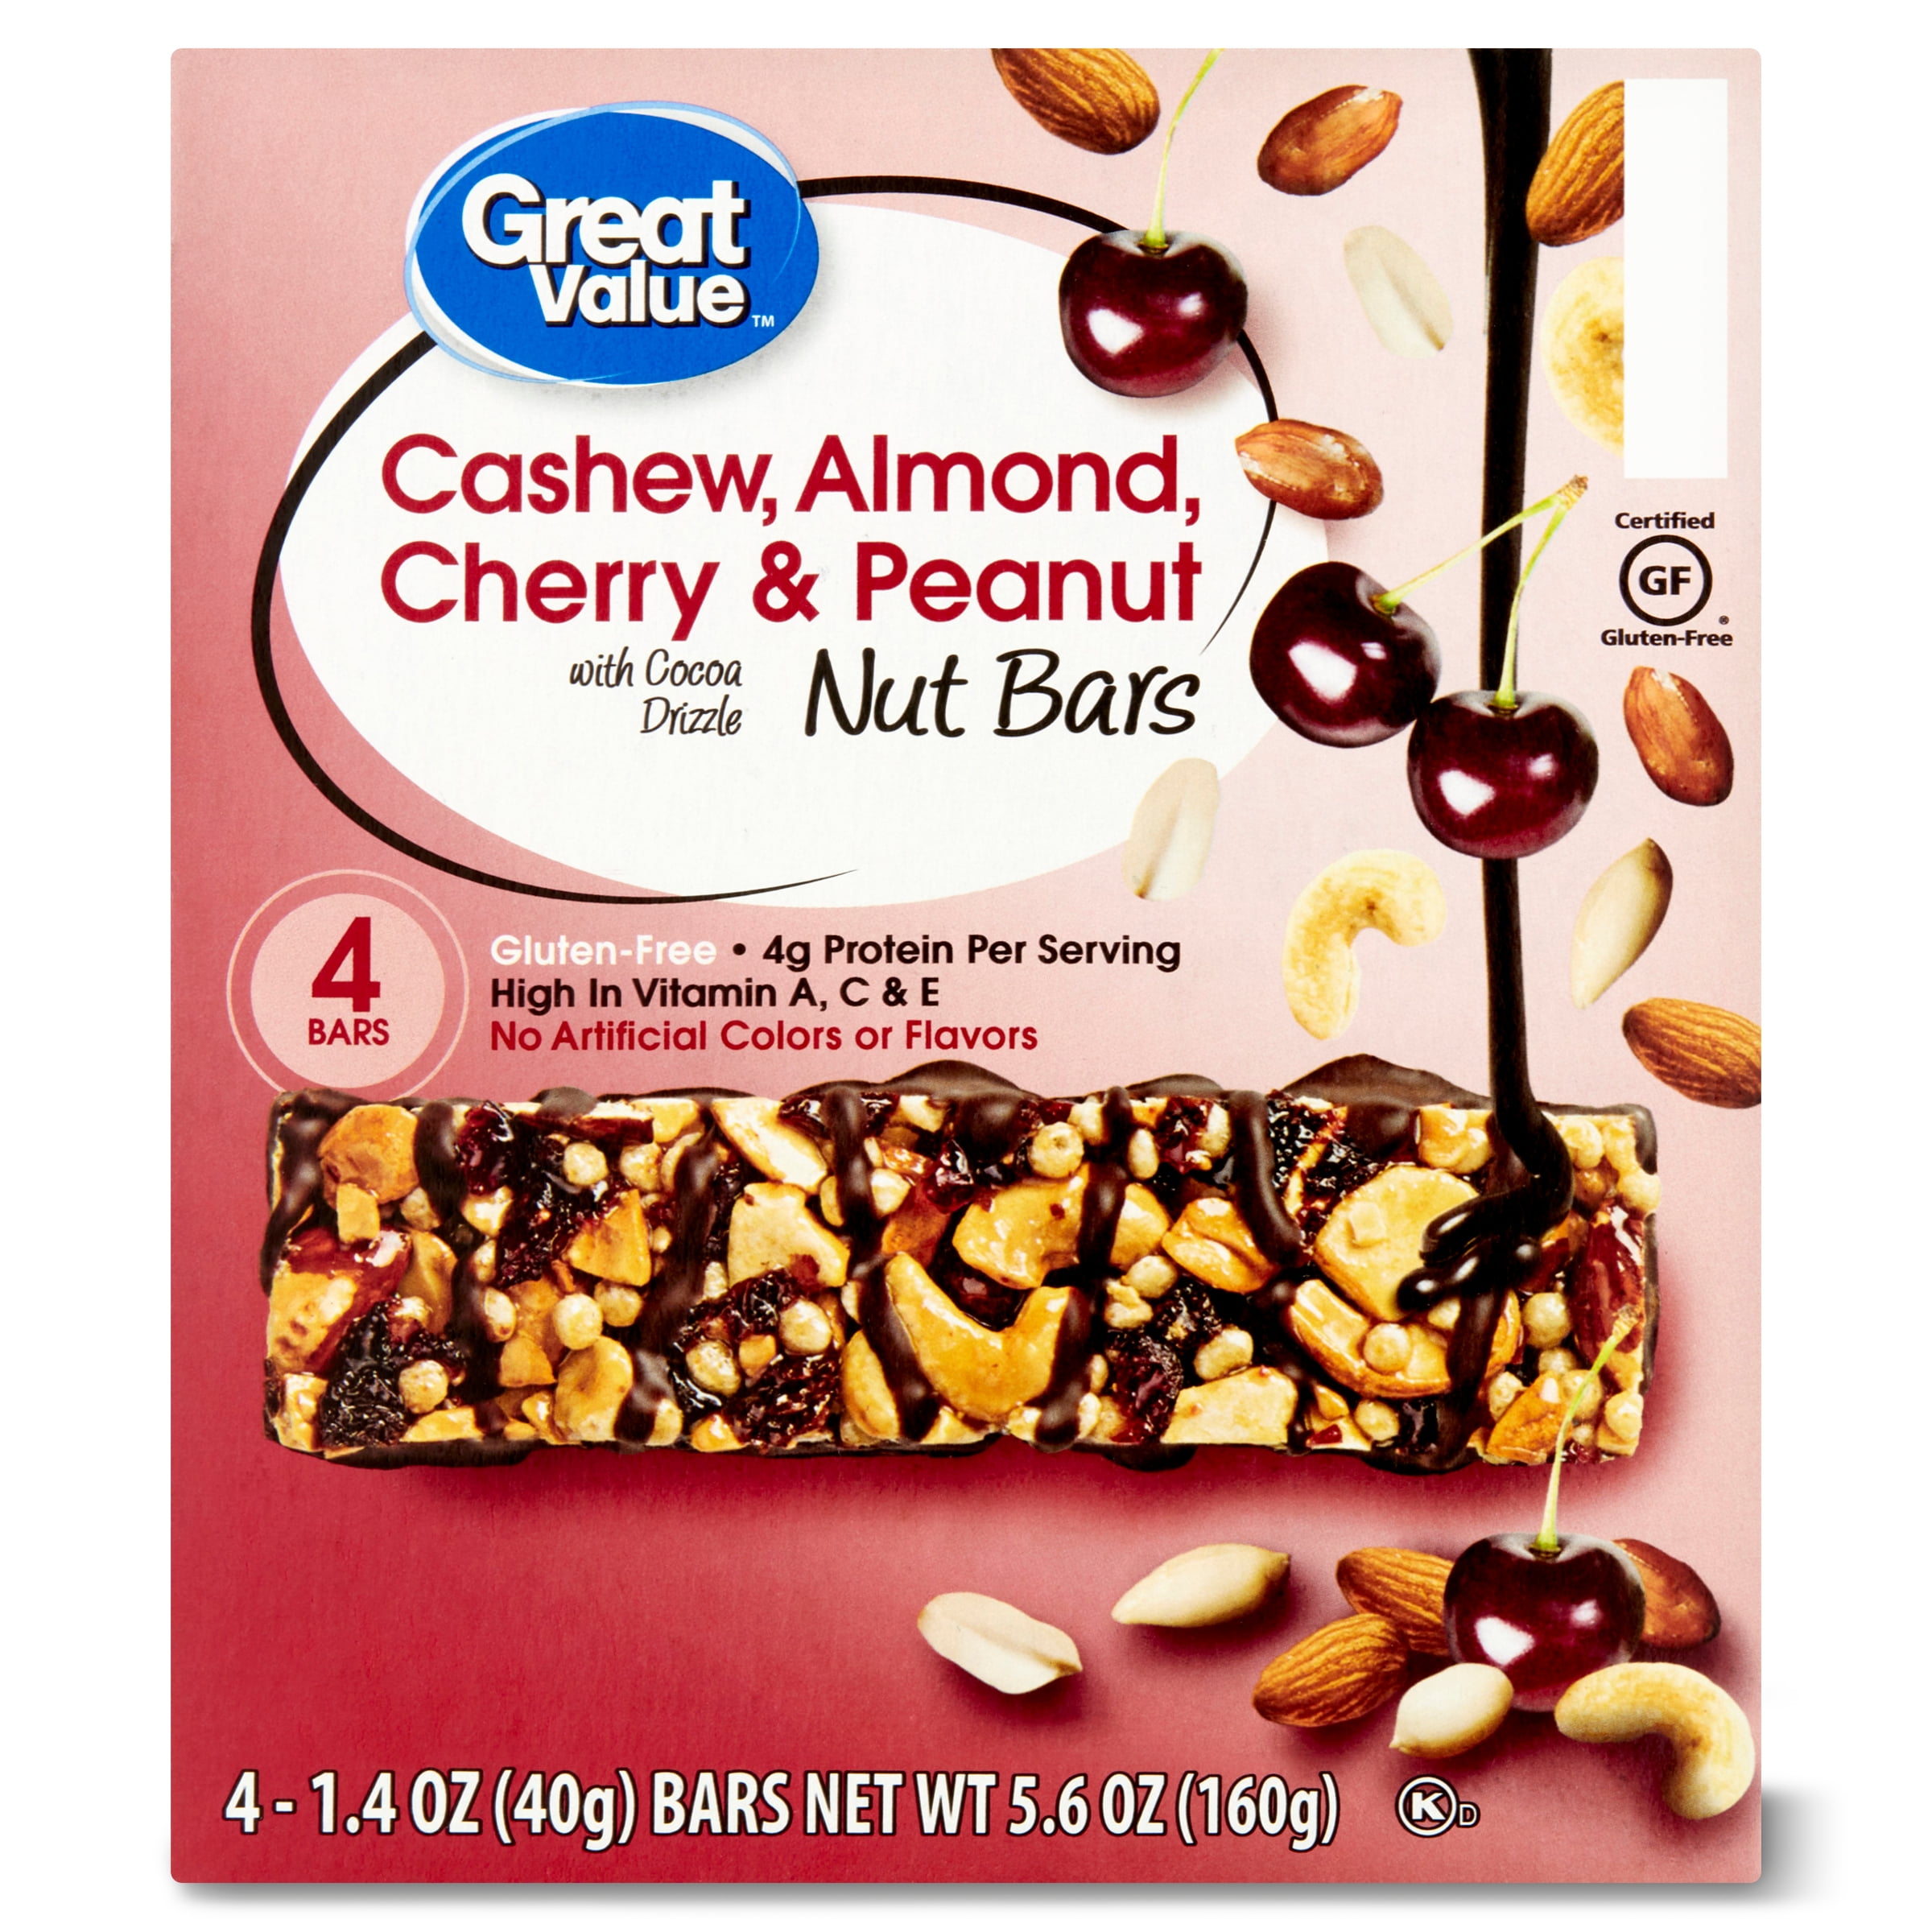 Great Value Cashew, Almond, Cherry, & Peanut Nut Bars with Cocoa Drizzle, 5.6 oz, 4 Count